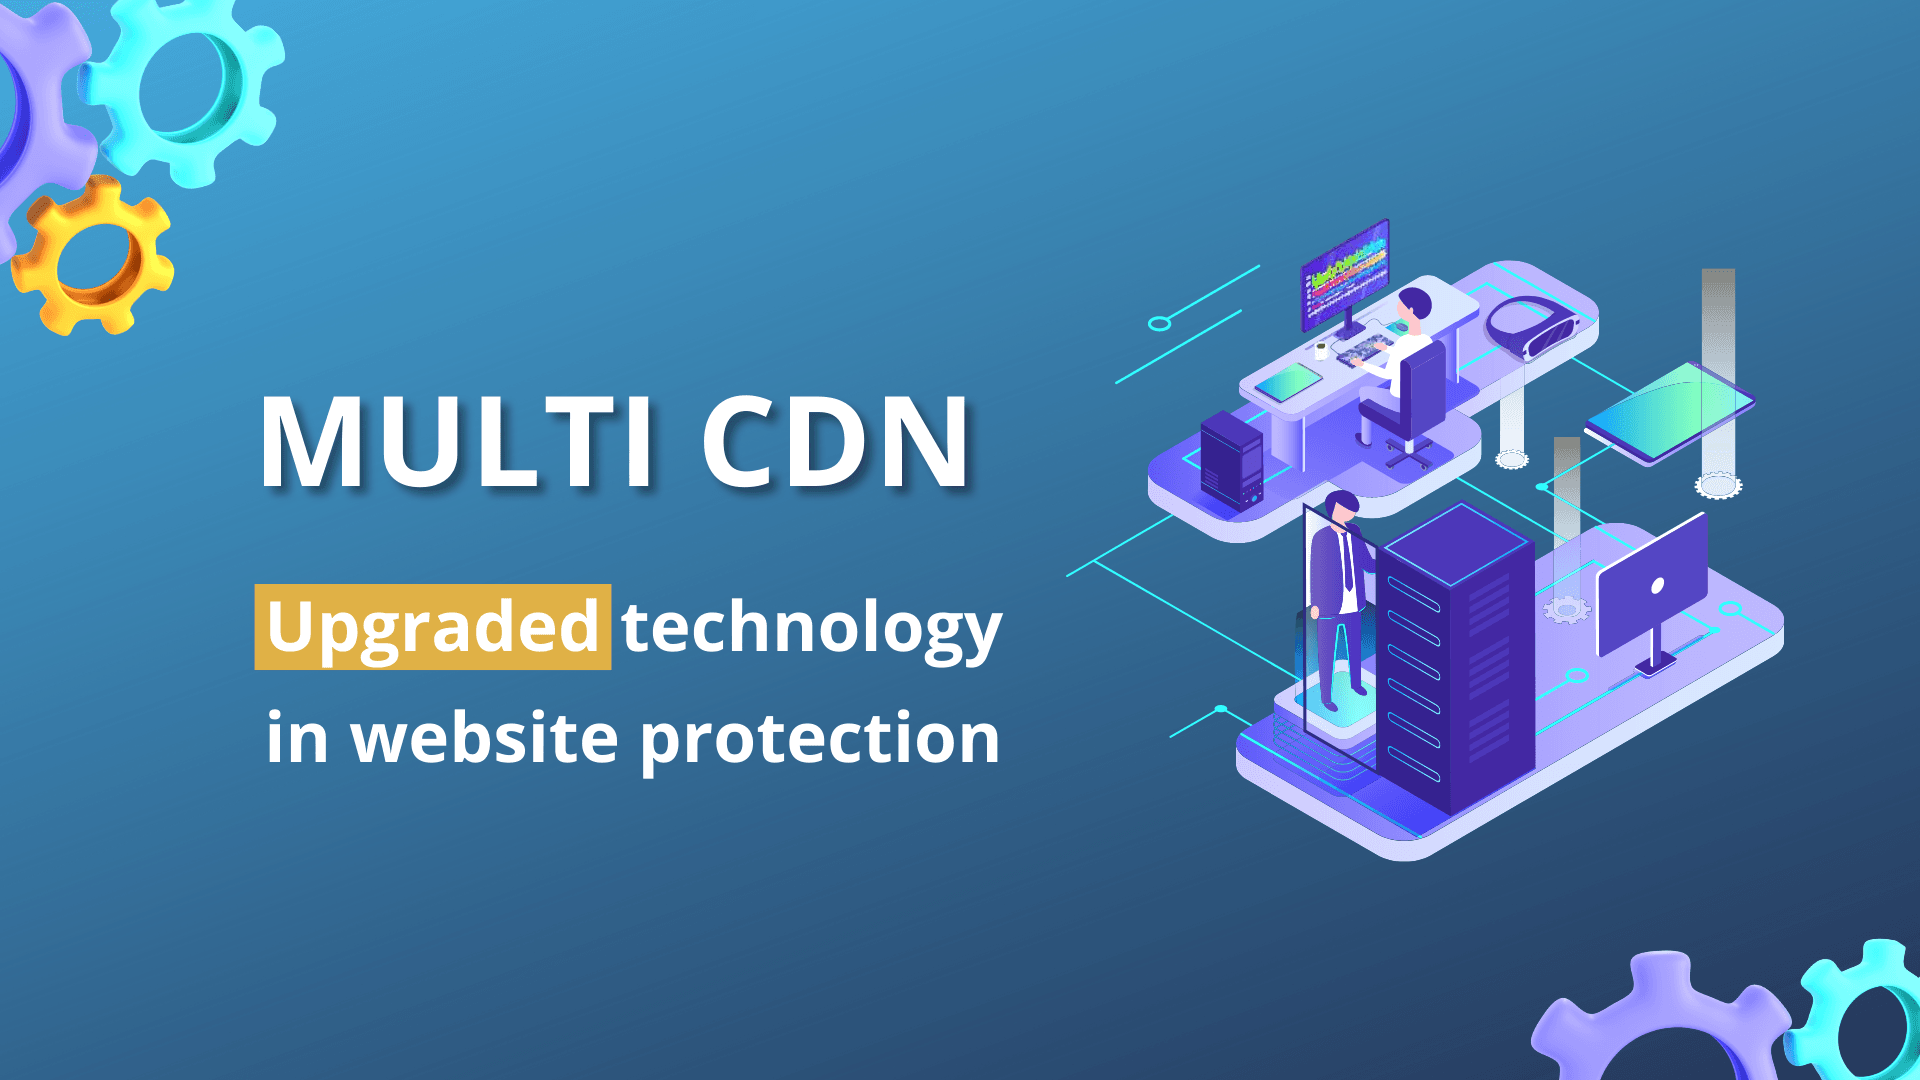 Multi CDN - Upgraded technology to speeding and securing website for business